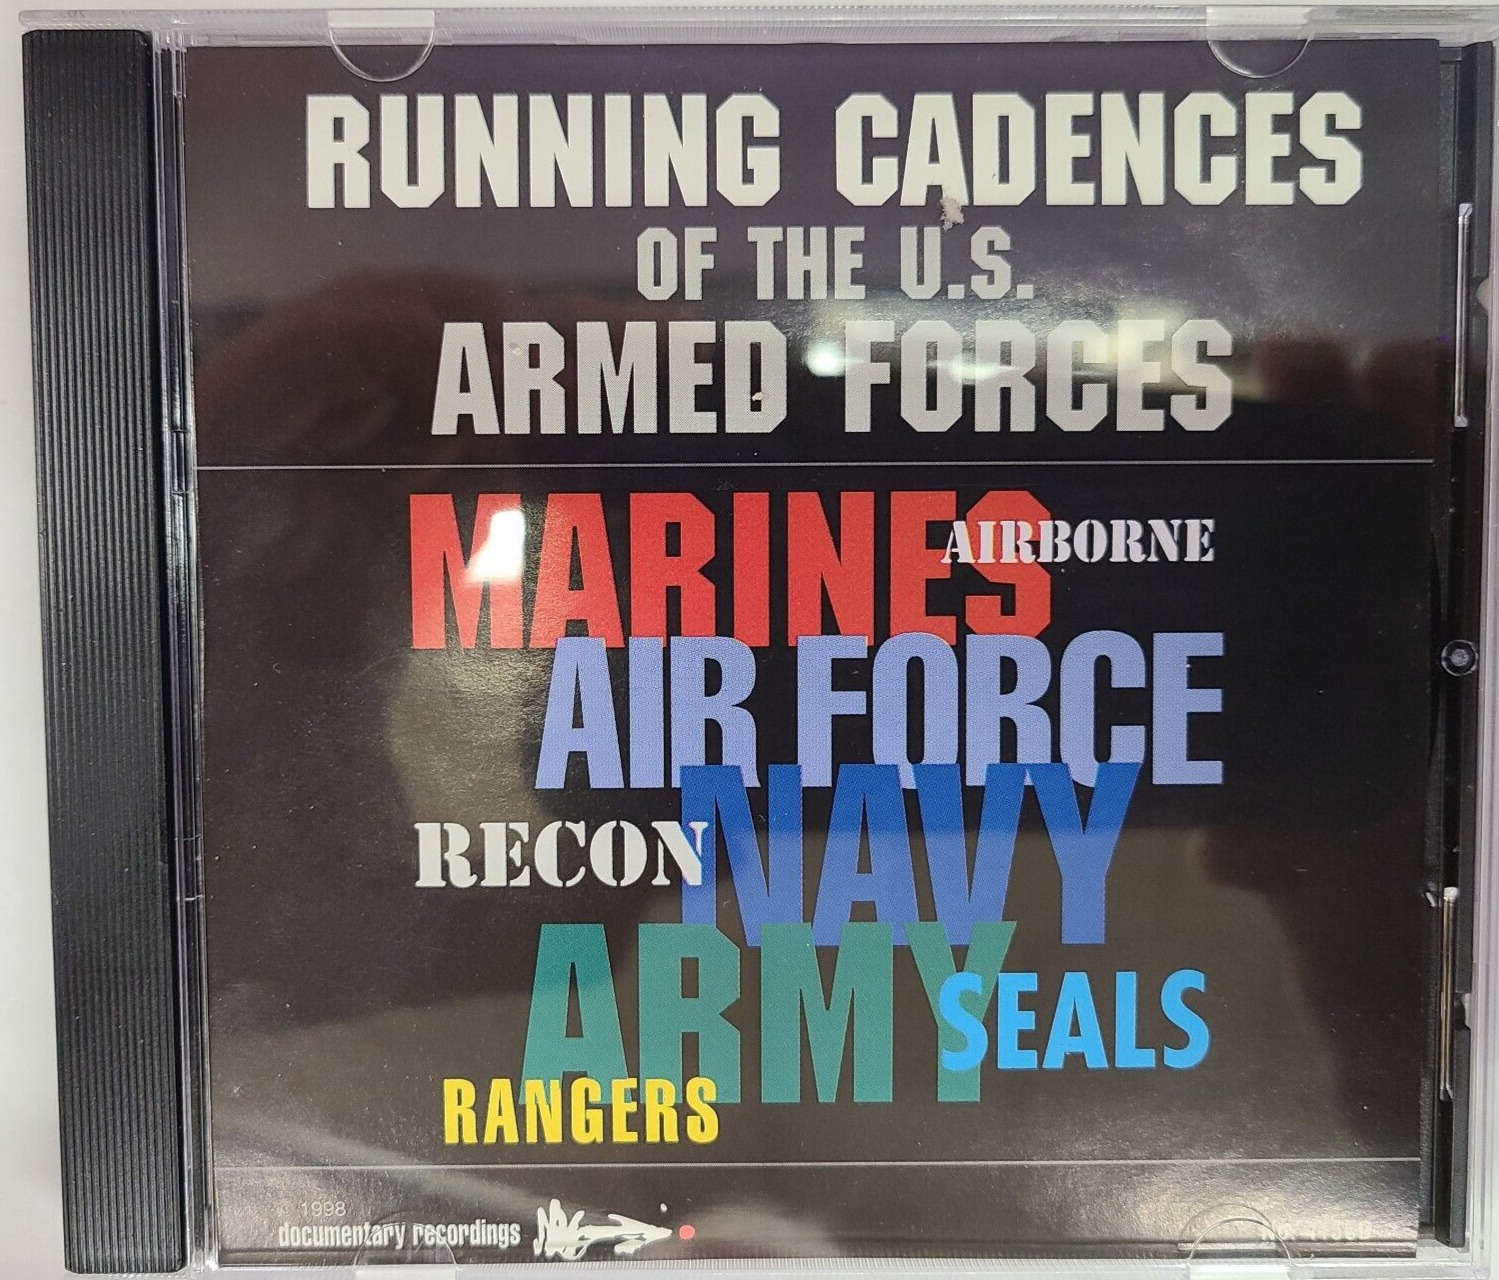 U.S. Armed Forces Running Cadences Of The Armed Forces CD Marines Air Force Navy